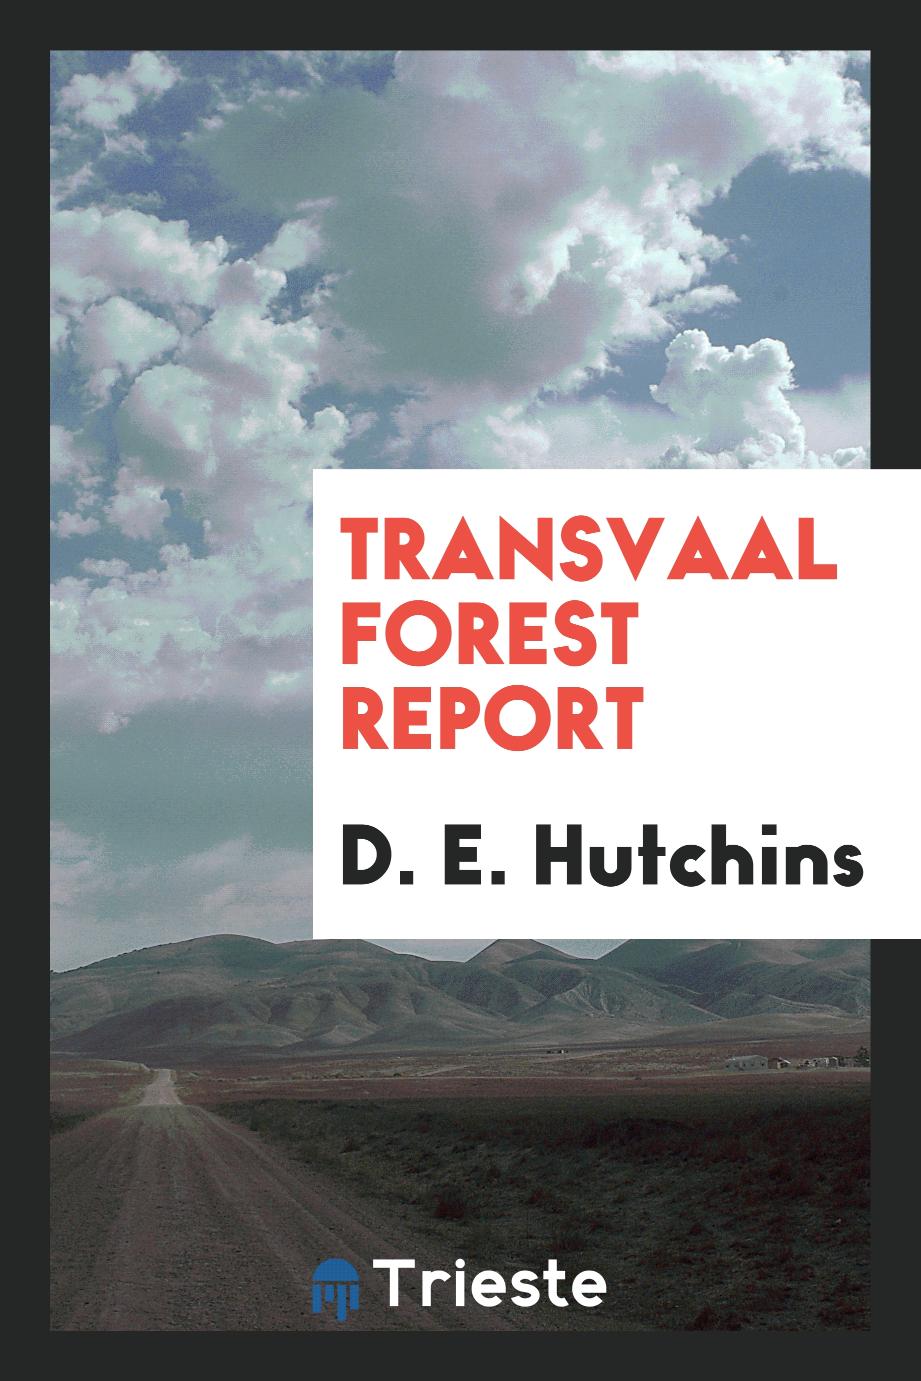 Transvaal Forest Report